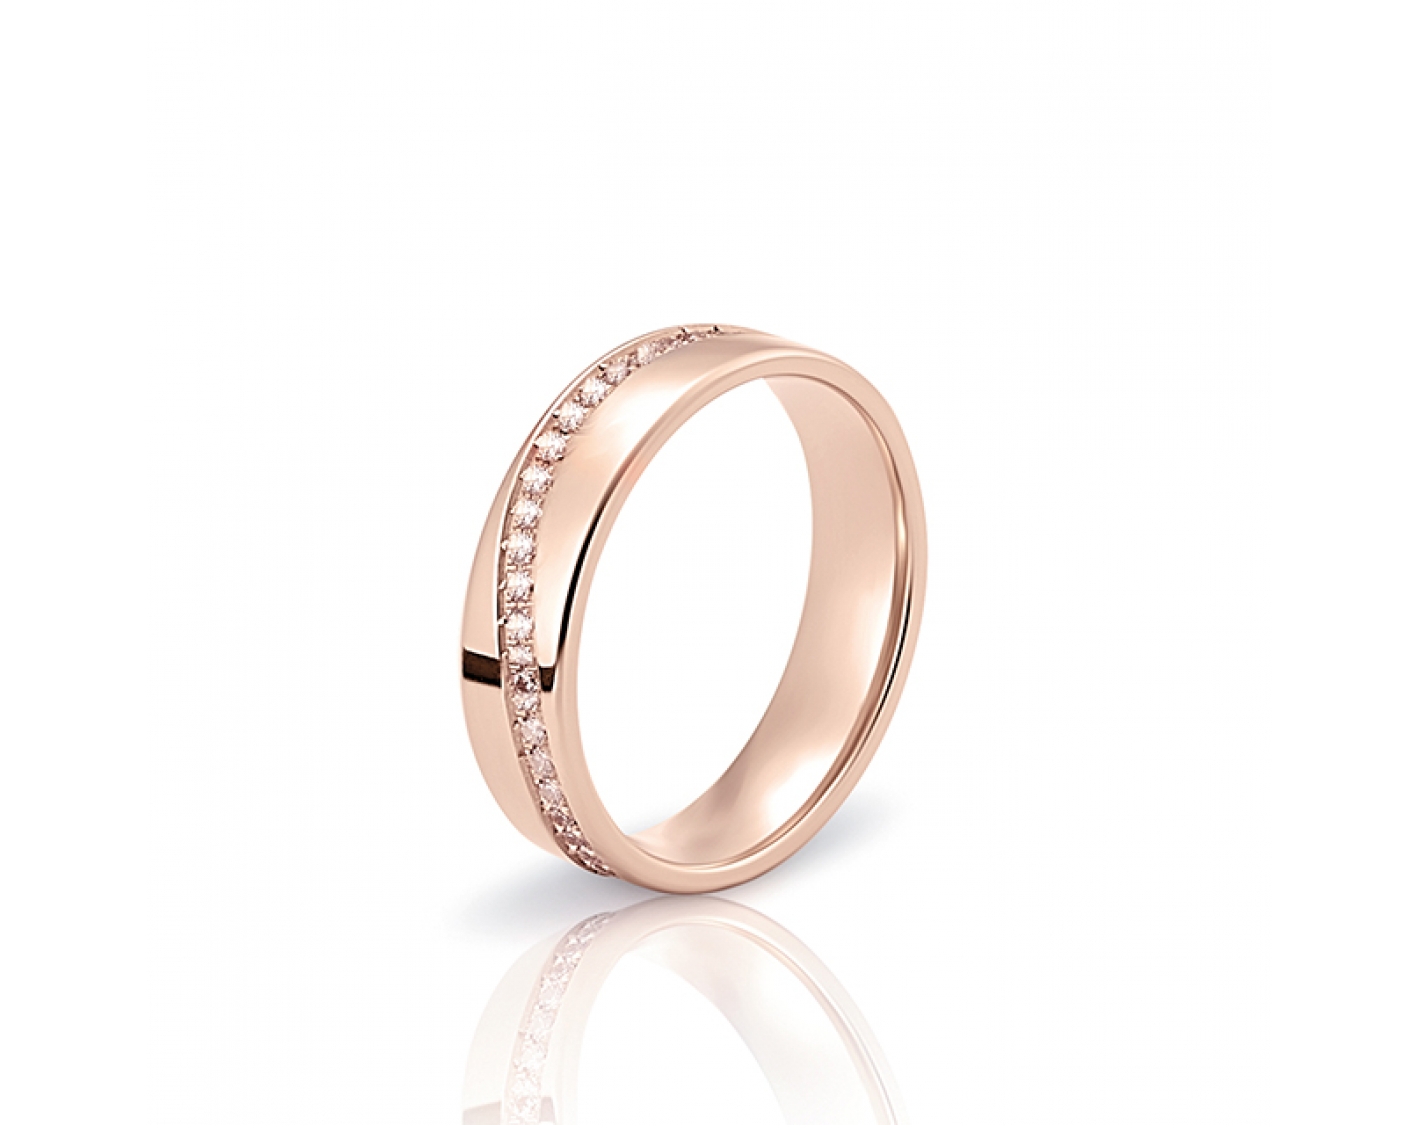 18k rose gold 5mm wedding band full setted with diamonds Photos & images